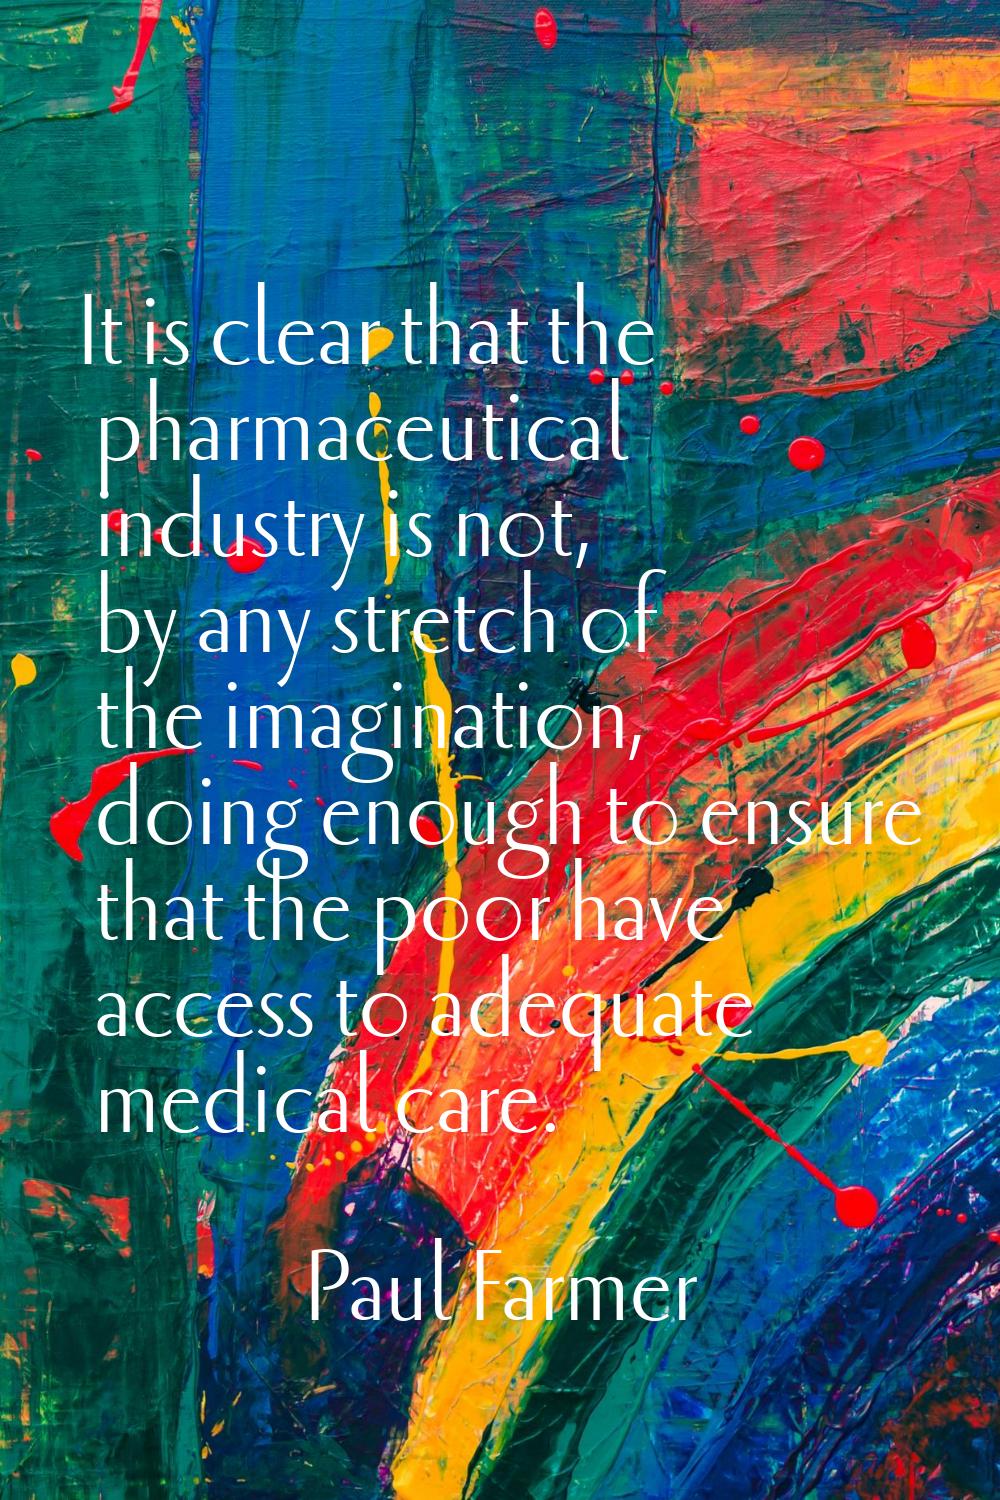 It is clear that the pharmaceutical industry is not, by any stretch of the imagination, doing enoug